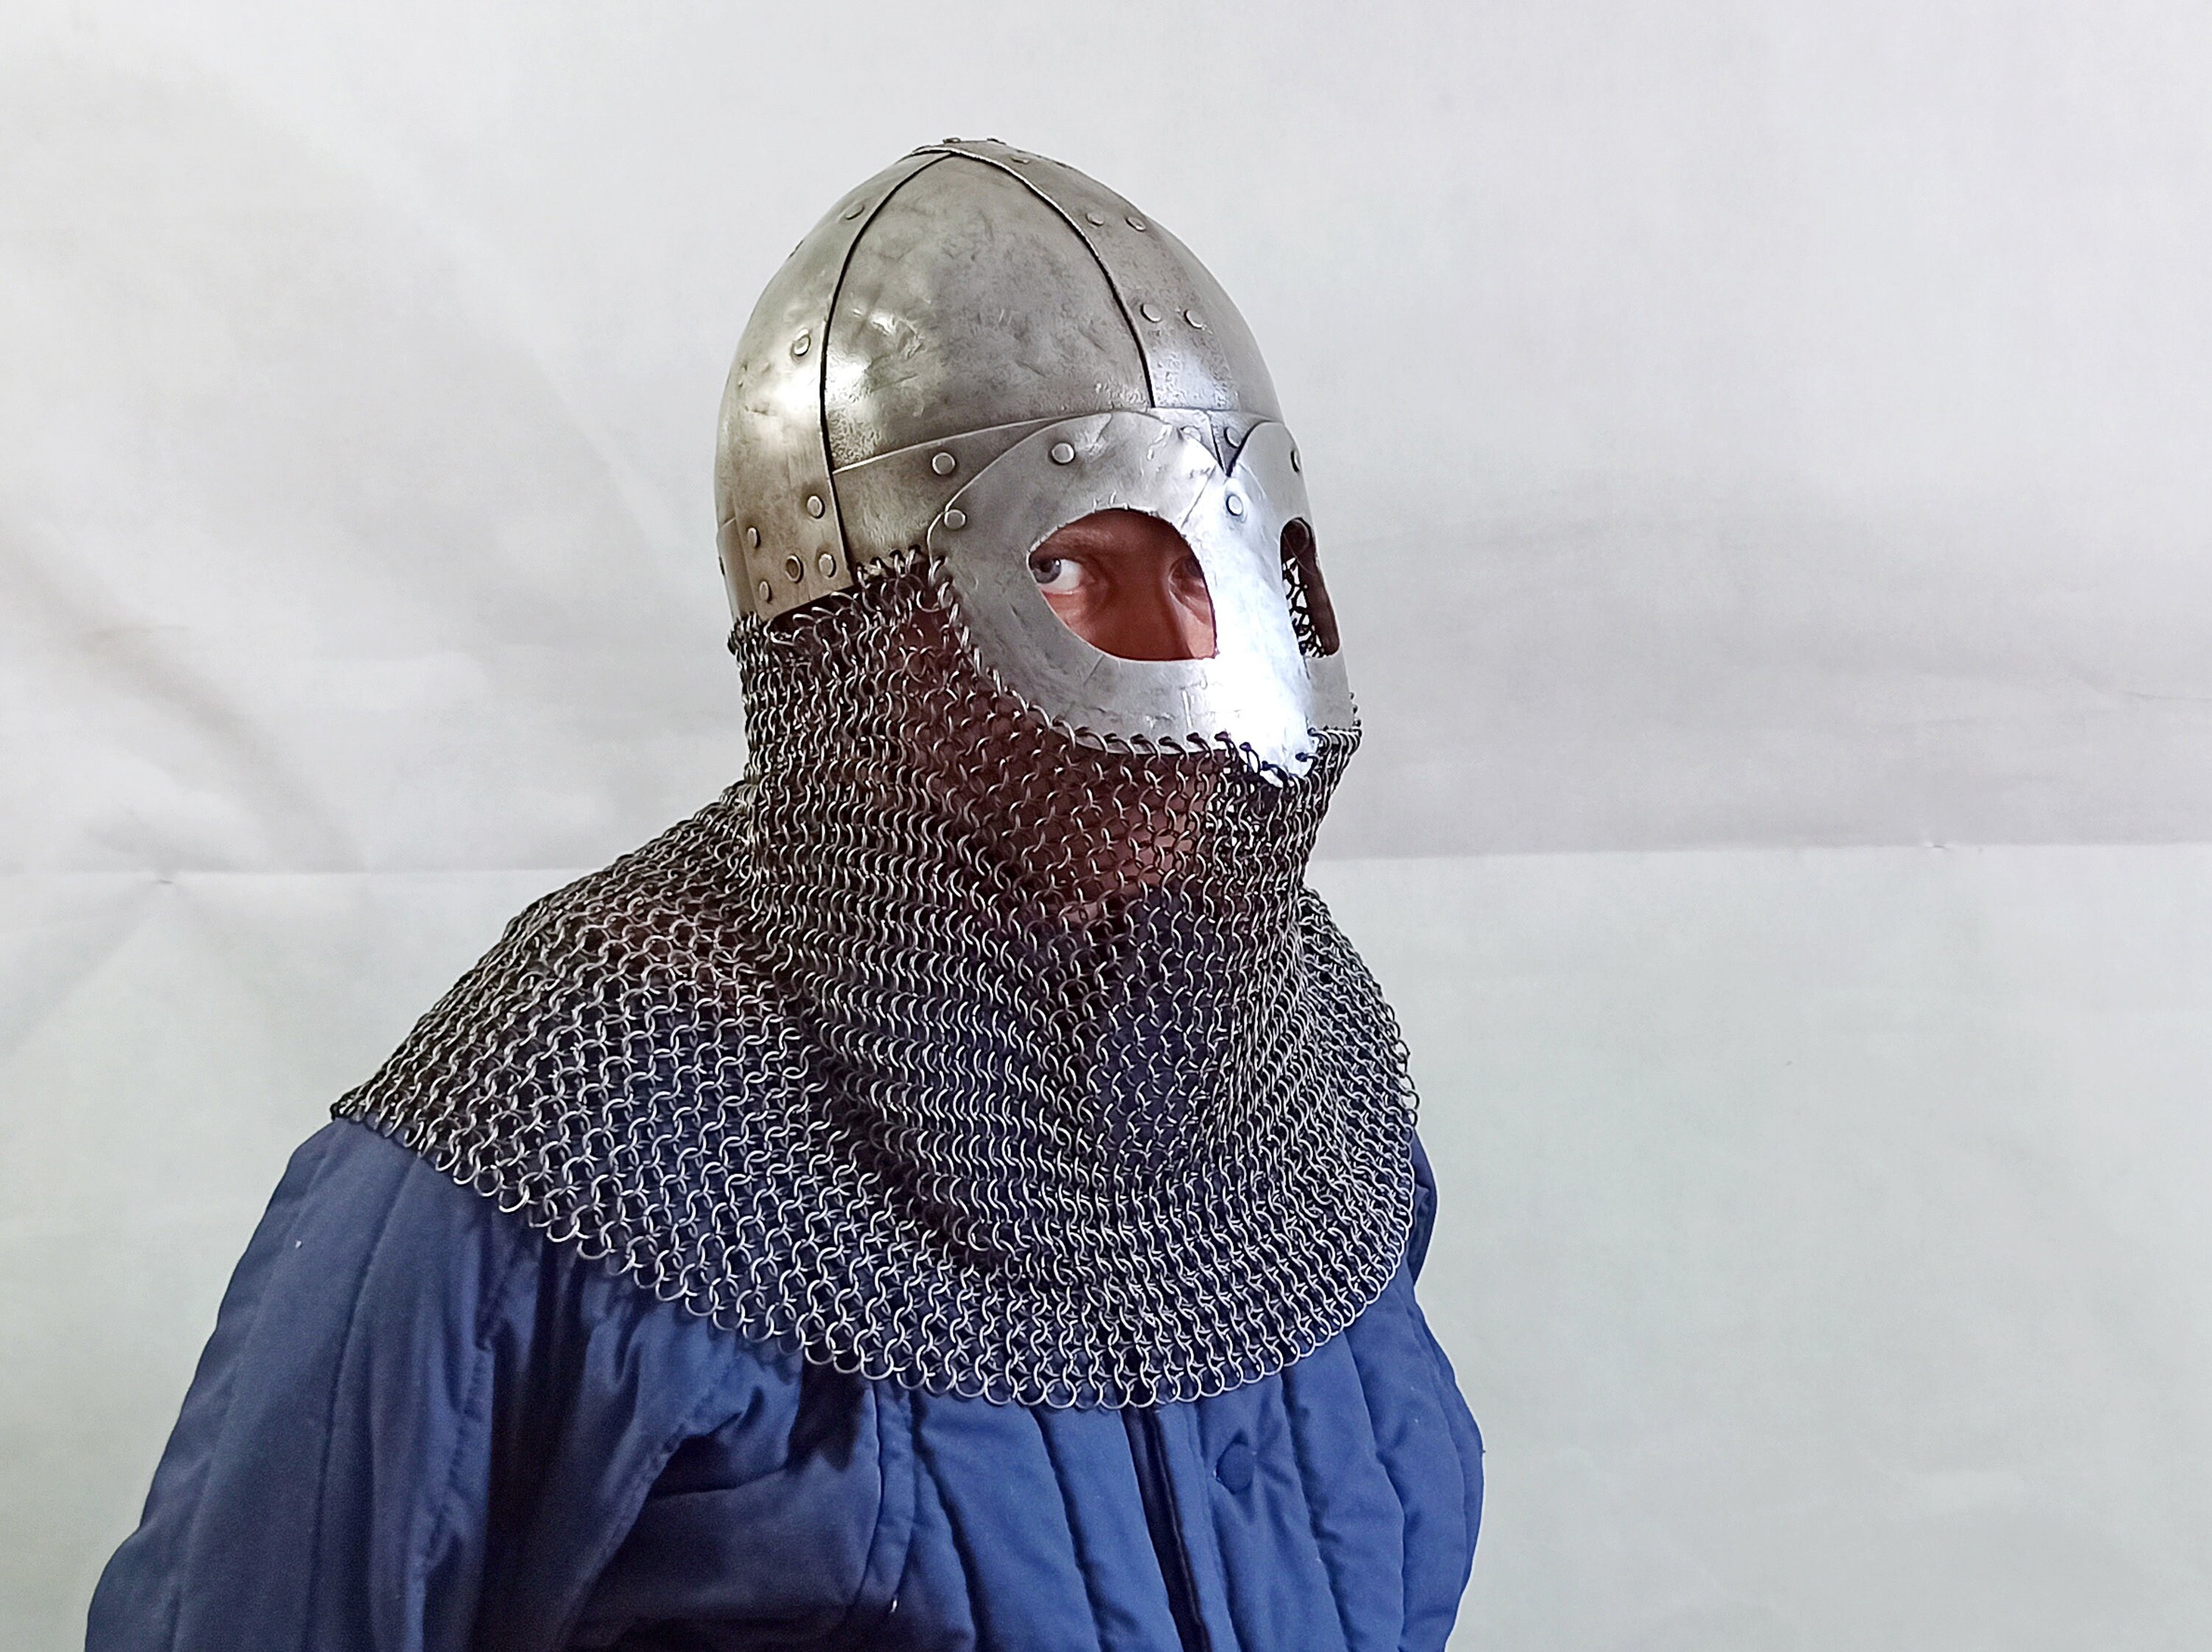 Details about   Medieval Gjermundbu Helmet Armor Greek With Stand With Chain Mail HALLOWEEN GIFT 